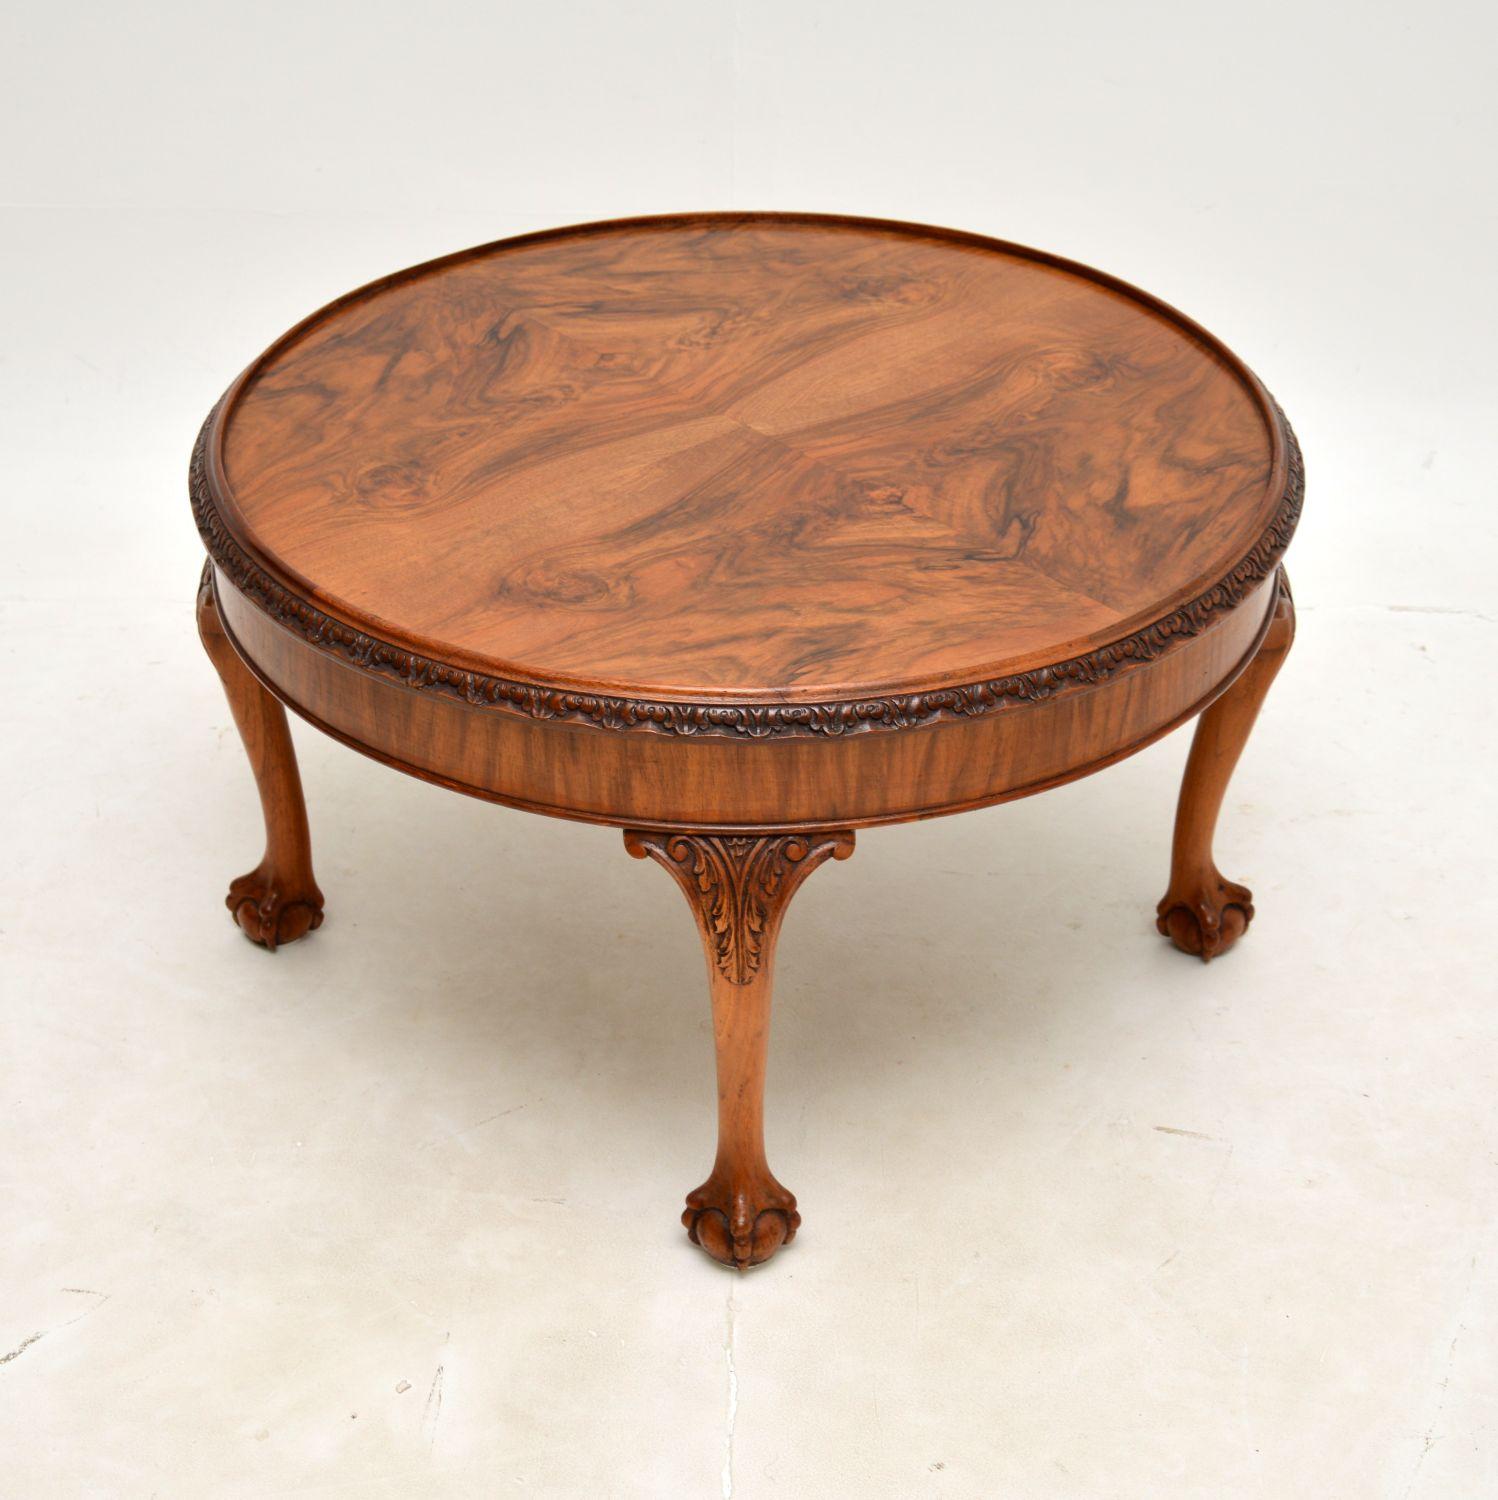 A wonderful antique figured walnut coffee table, made in England and dating from the 1920-30’s.

It is of superb quality and is a very useful size. The circular top has absolutely gorgeous figured walnut grain patterns, this sits on cabriole legs